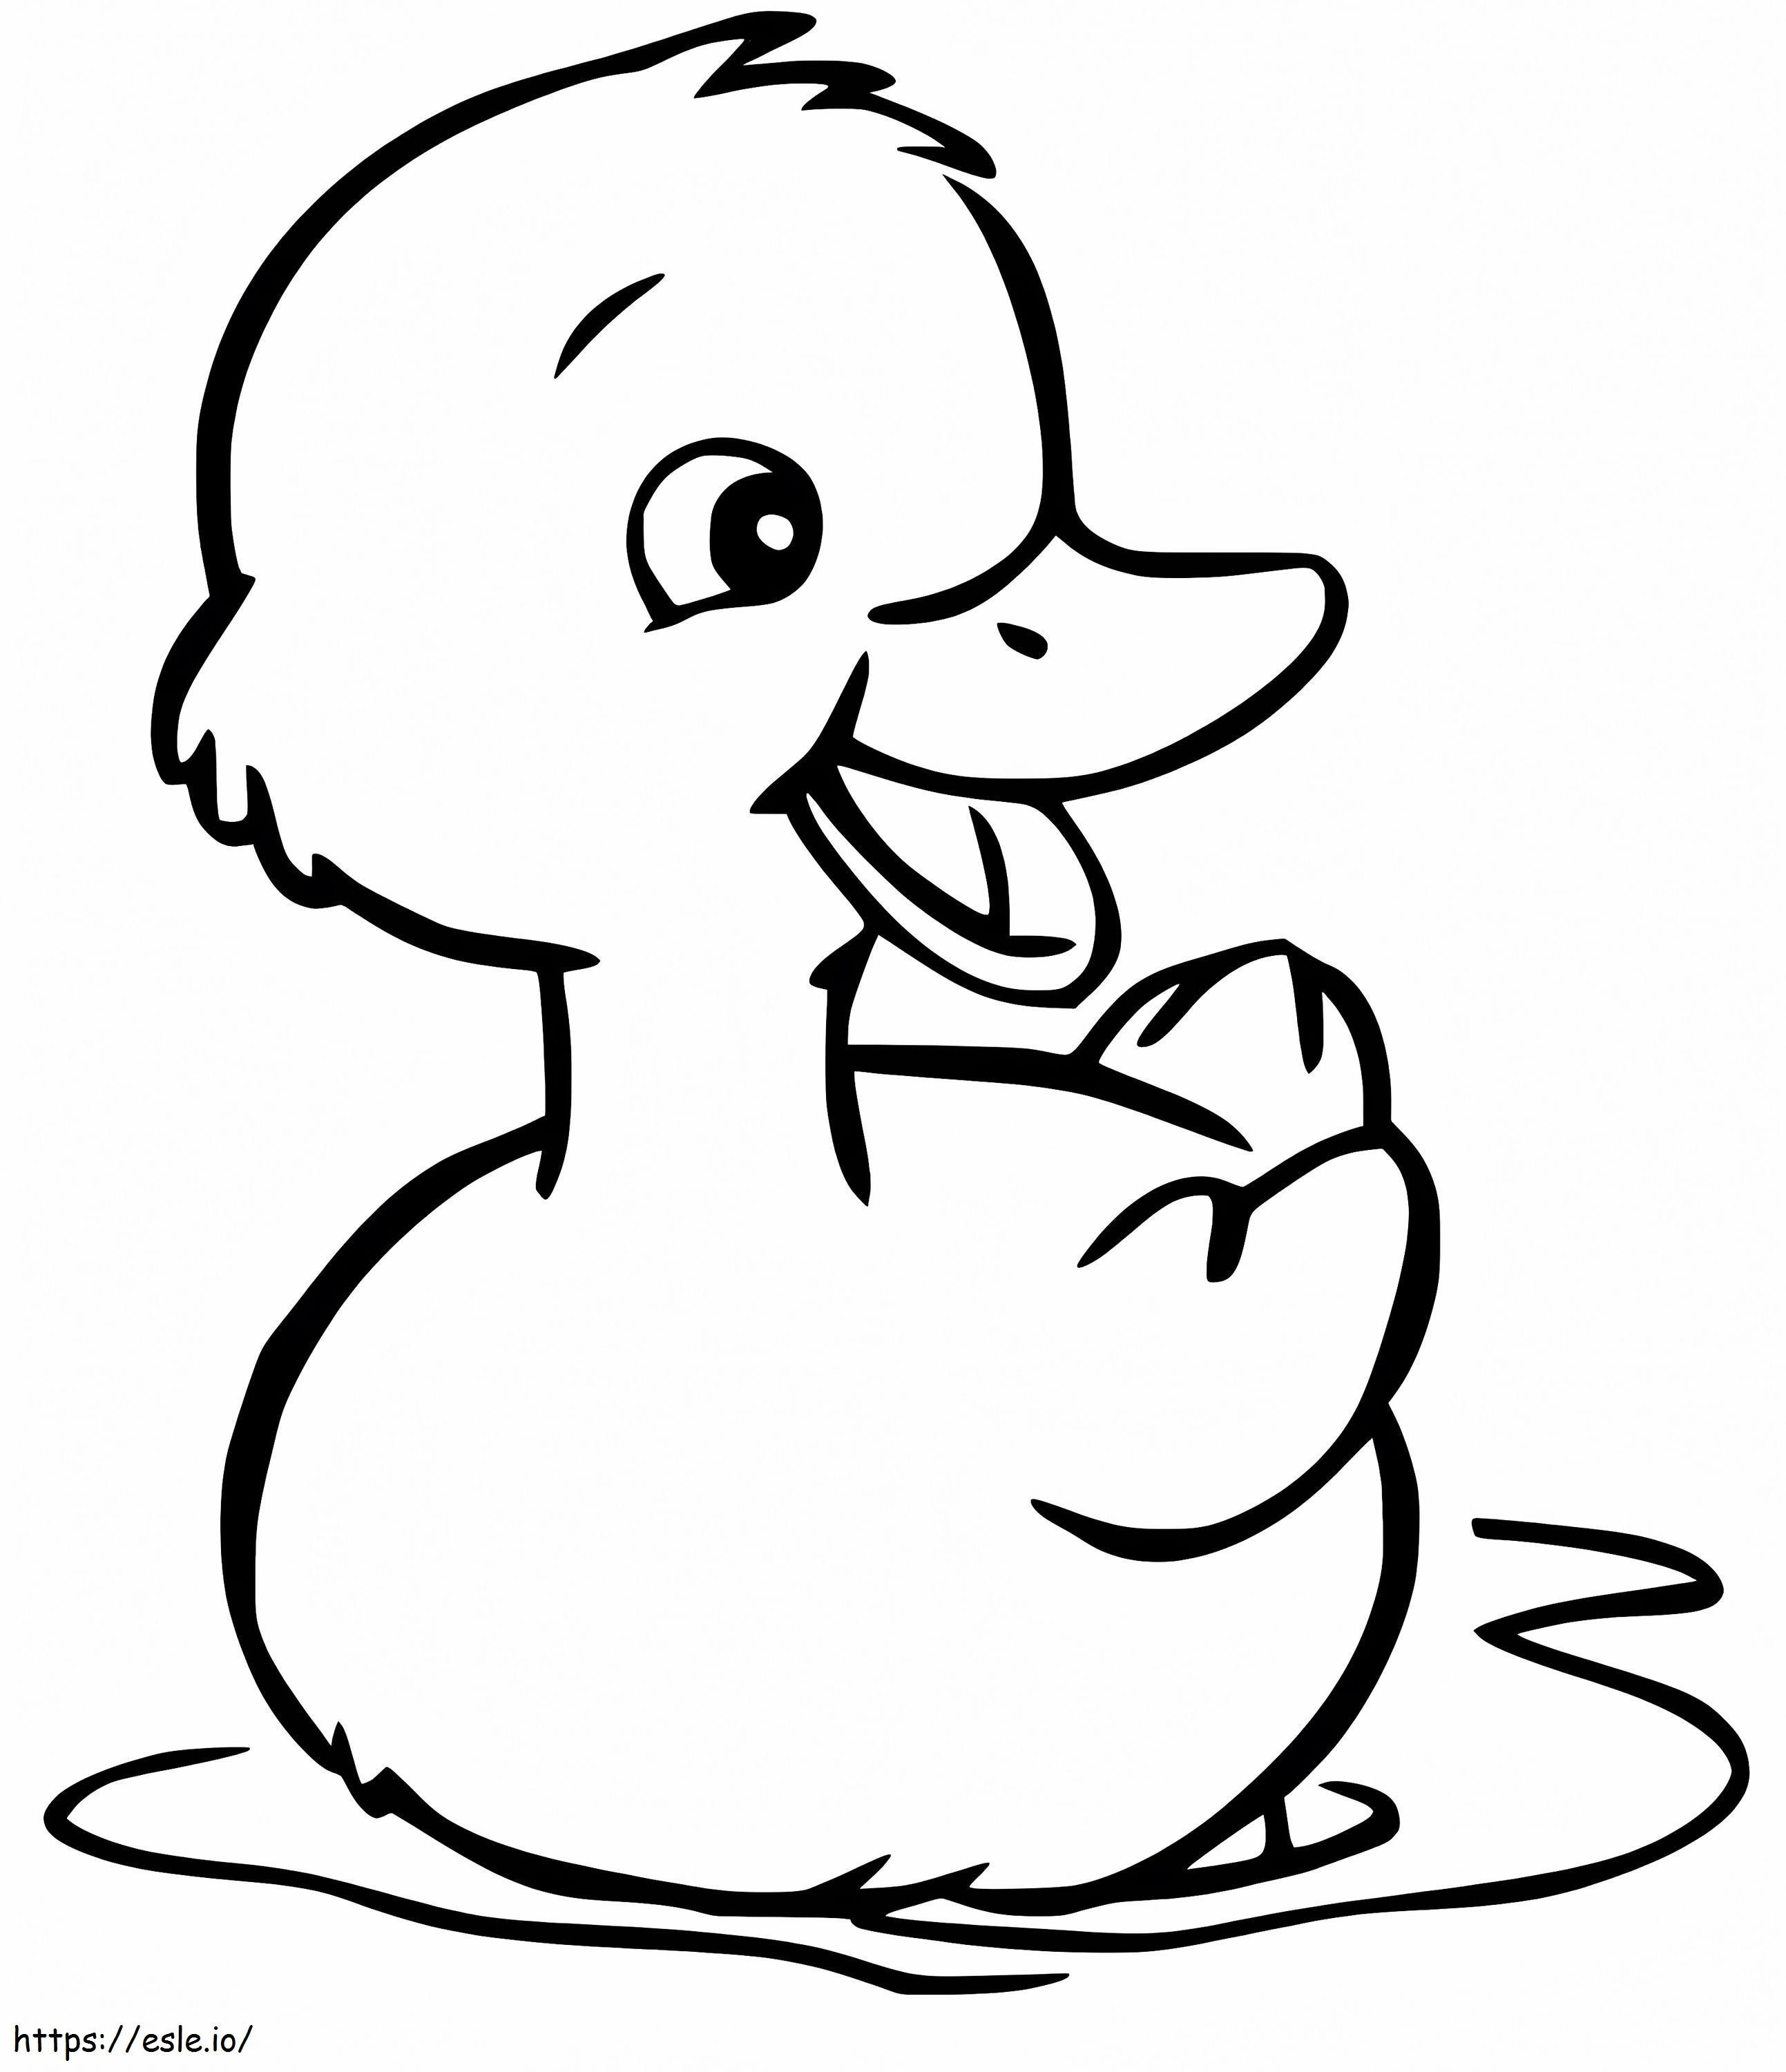 Duckling Smiling coloring page